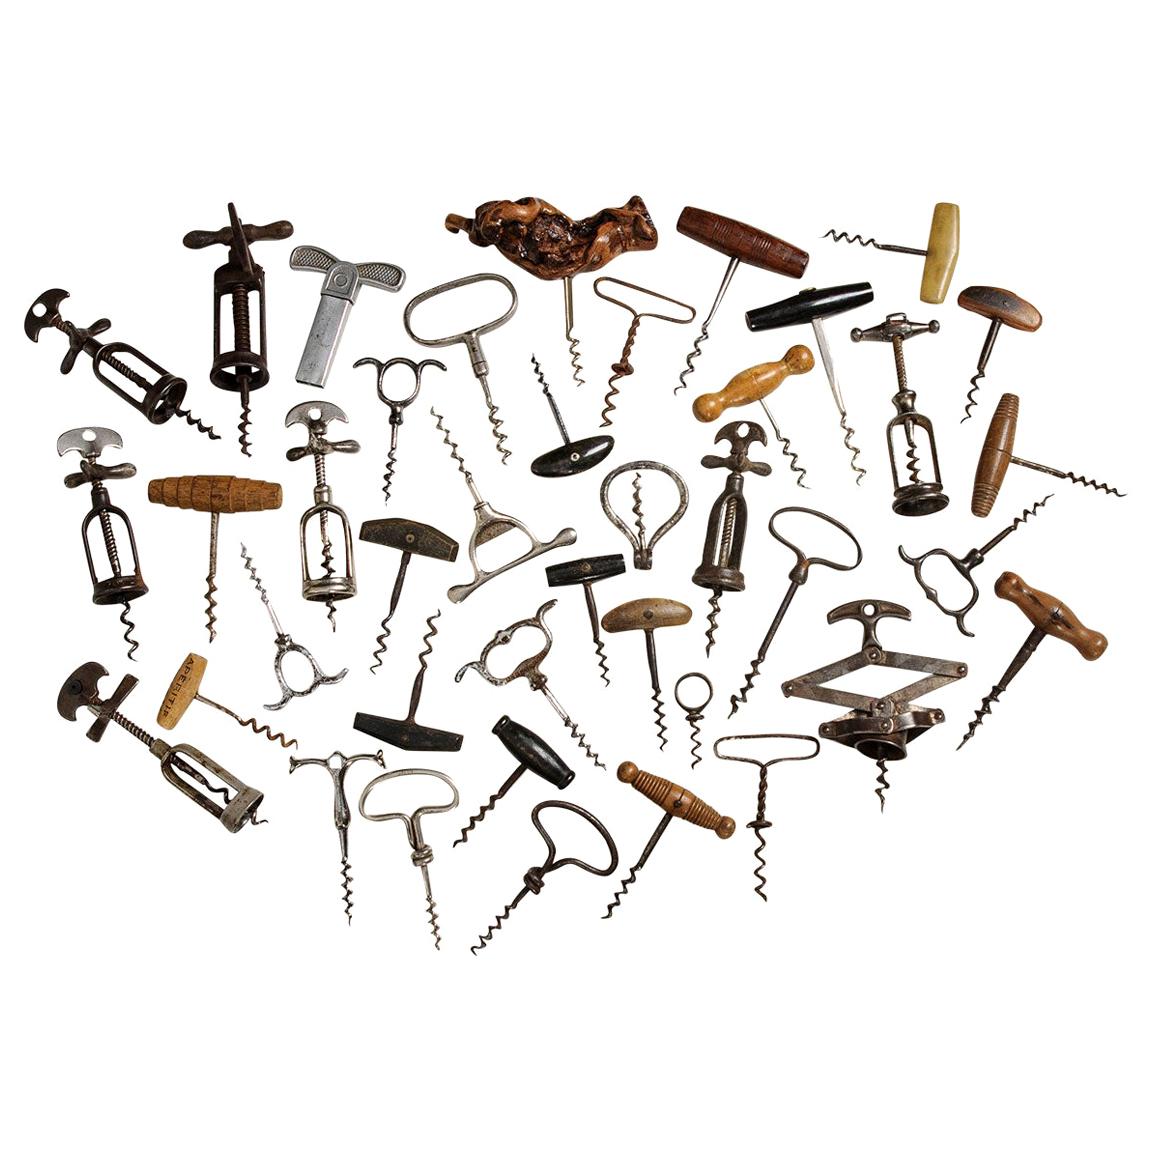 Vintage French Collection of Corkscrews